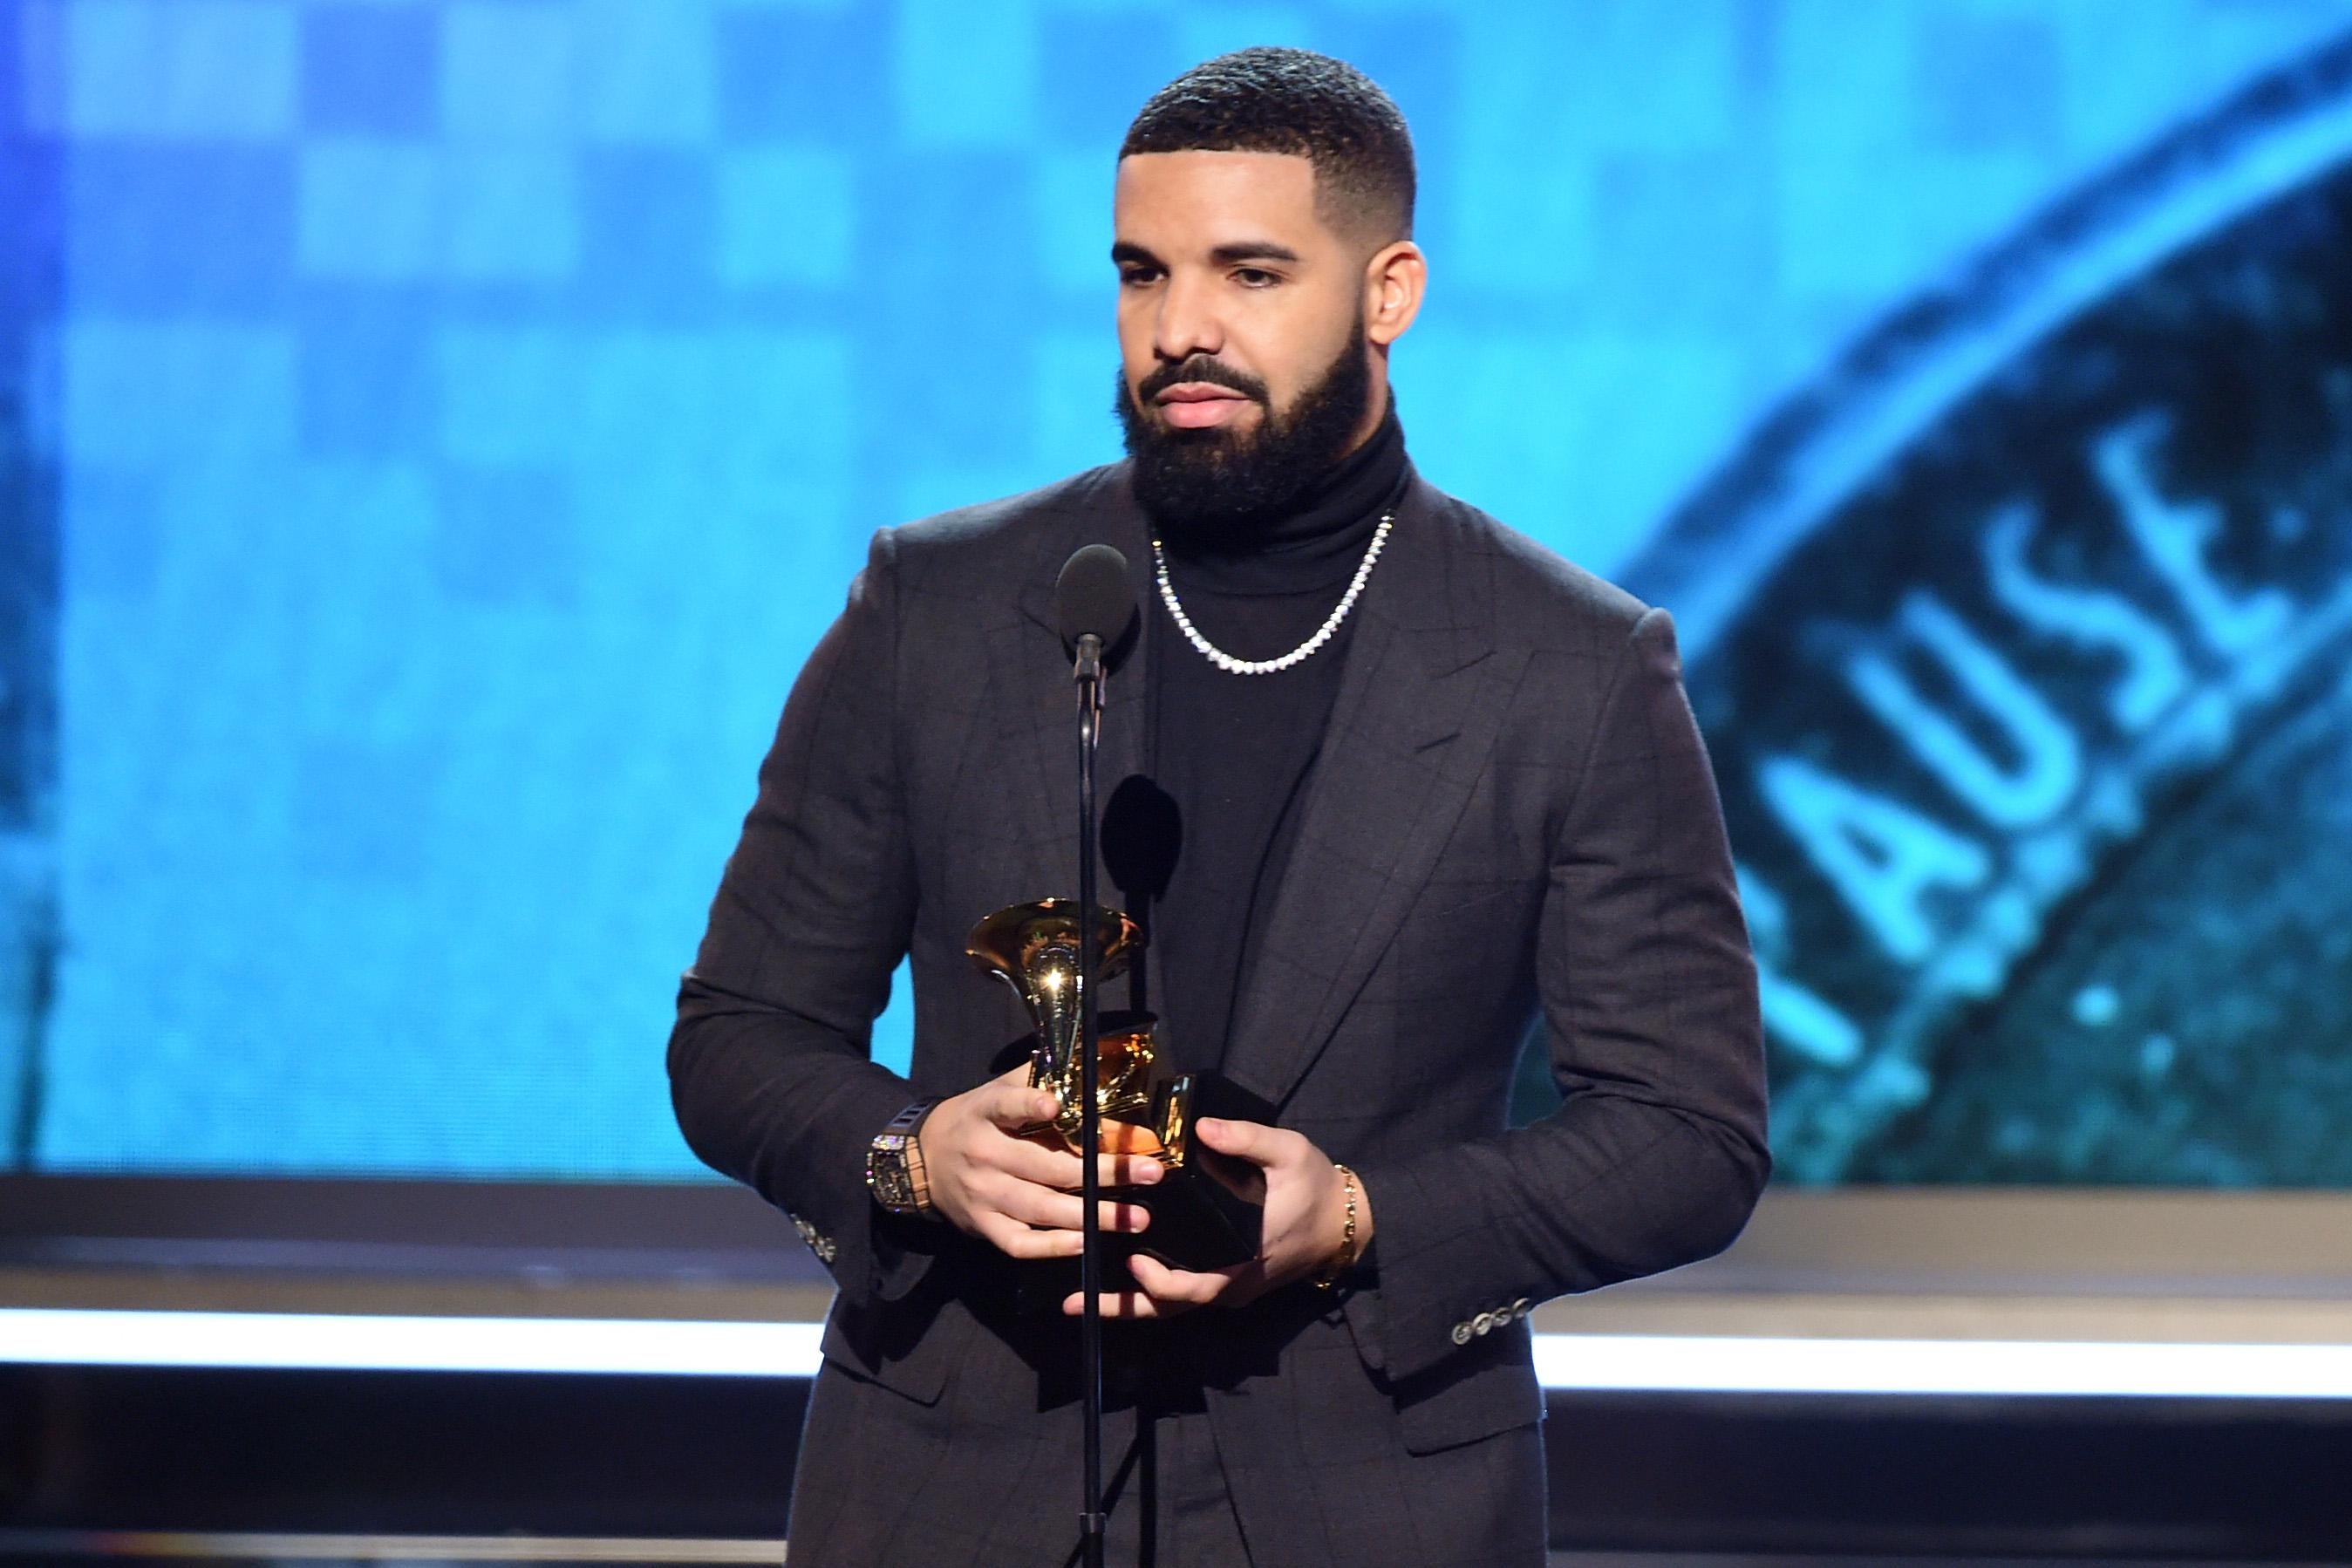 It was a surprise that Drake even showed up. The Grammys may wish he hadn't.